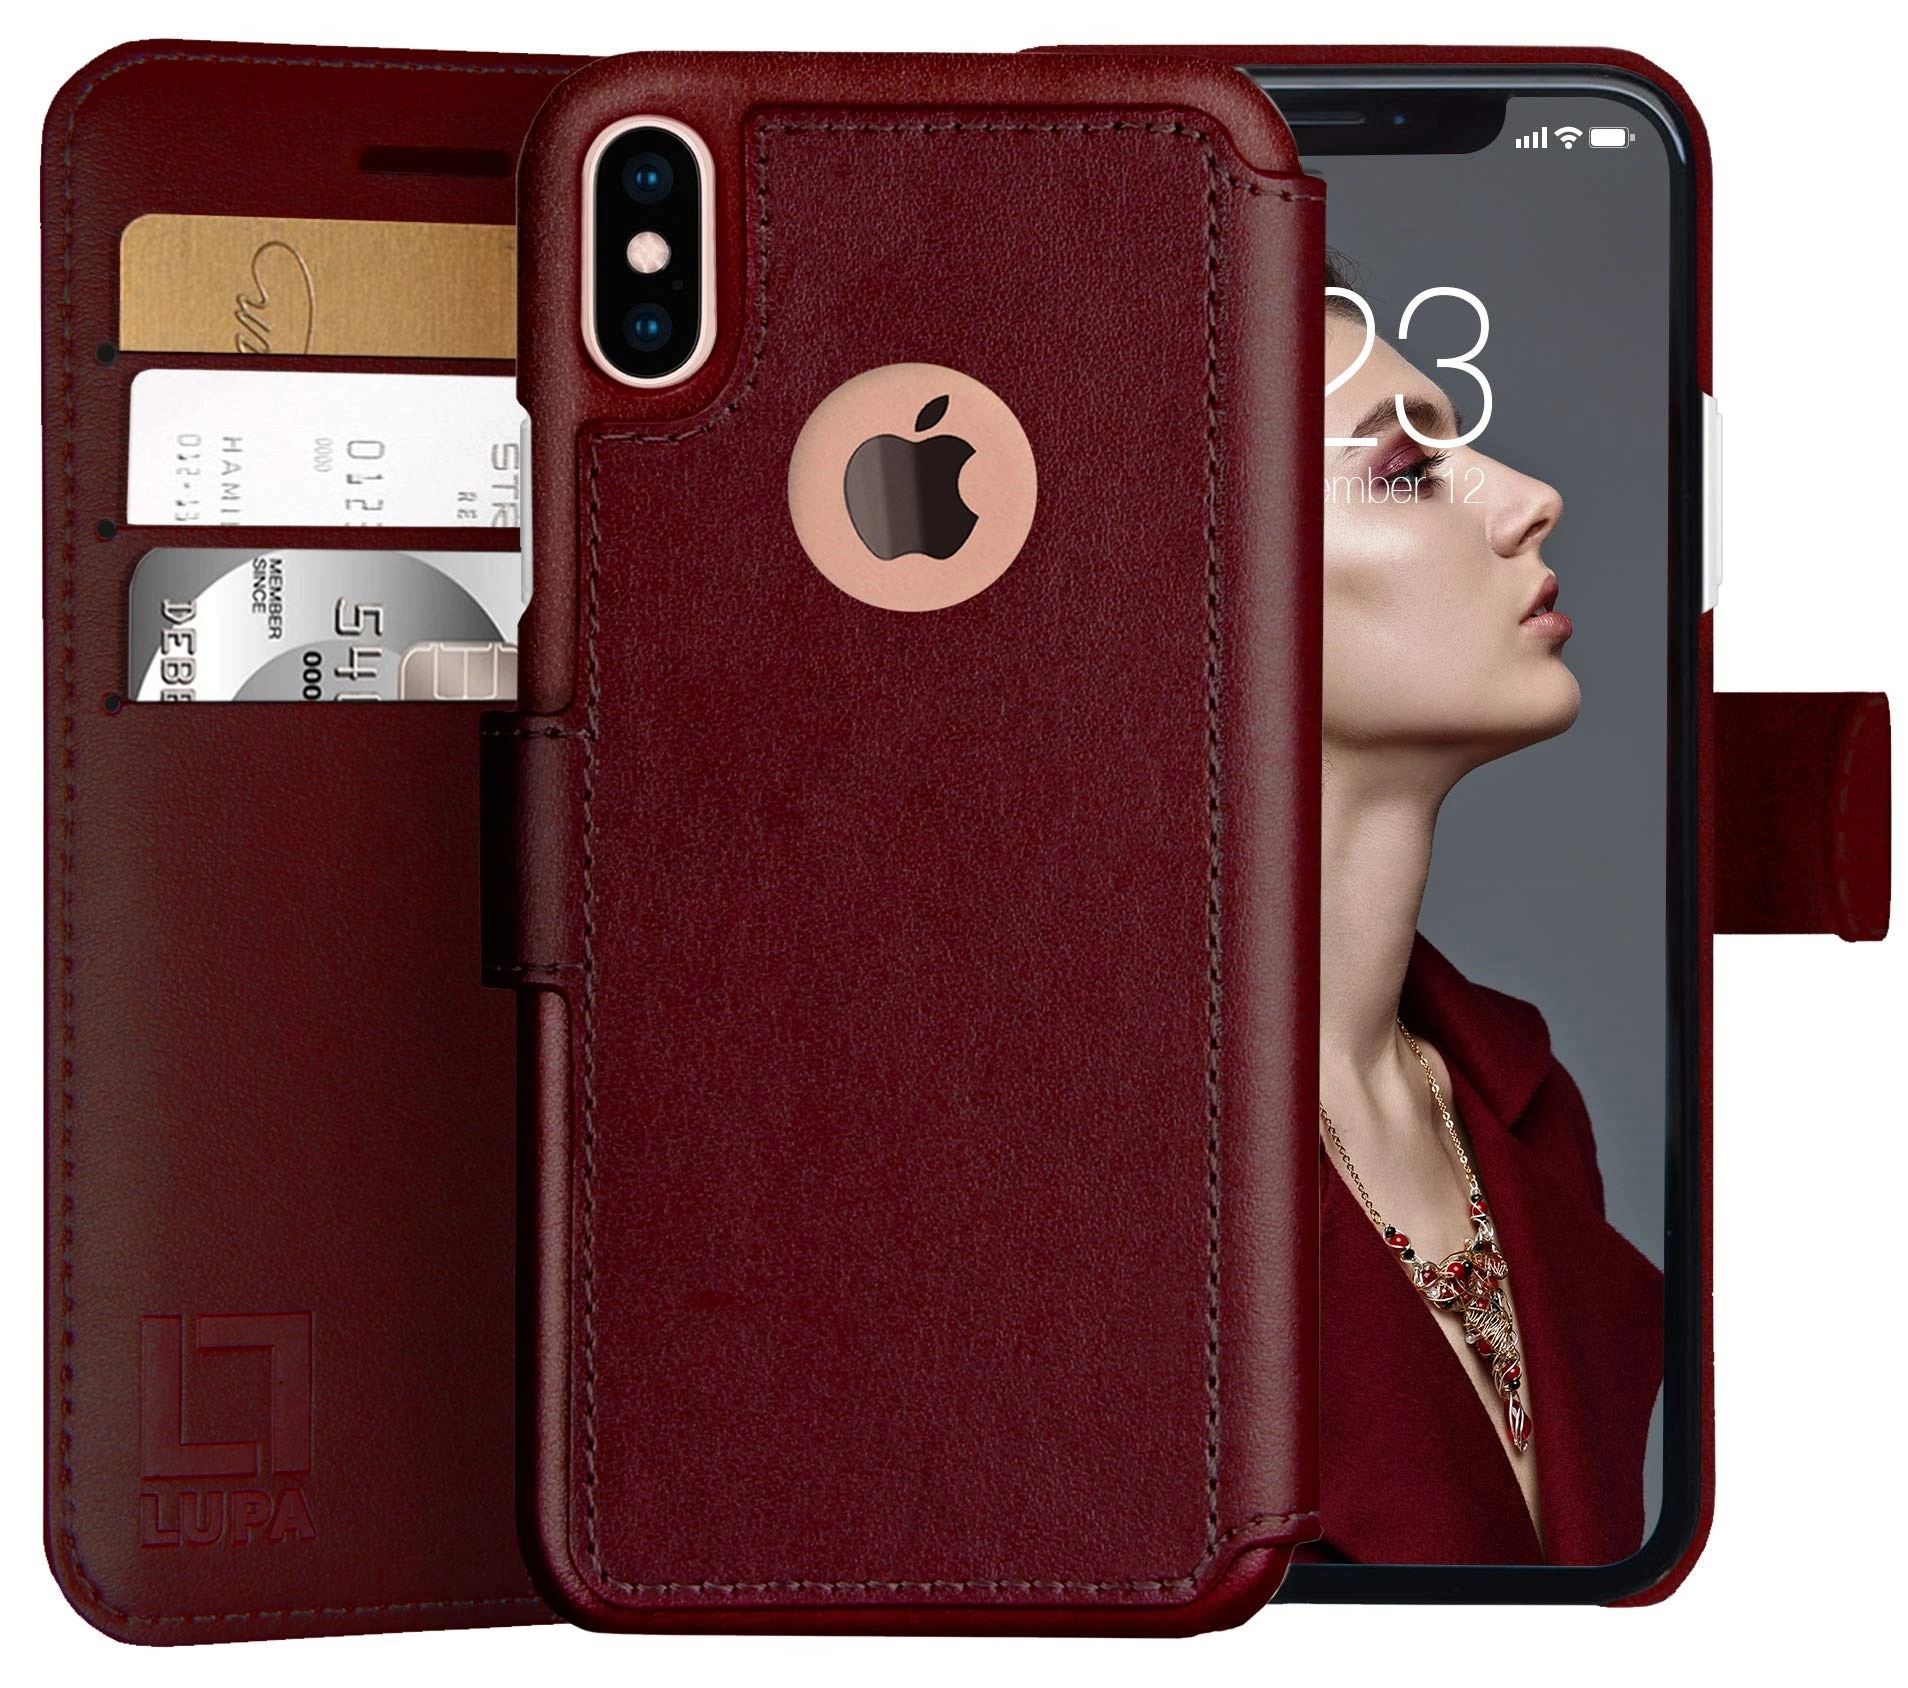 Iphone Xs Cardholder Max Cases: Guide to Chose the Right Case for Your Needs